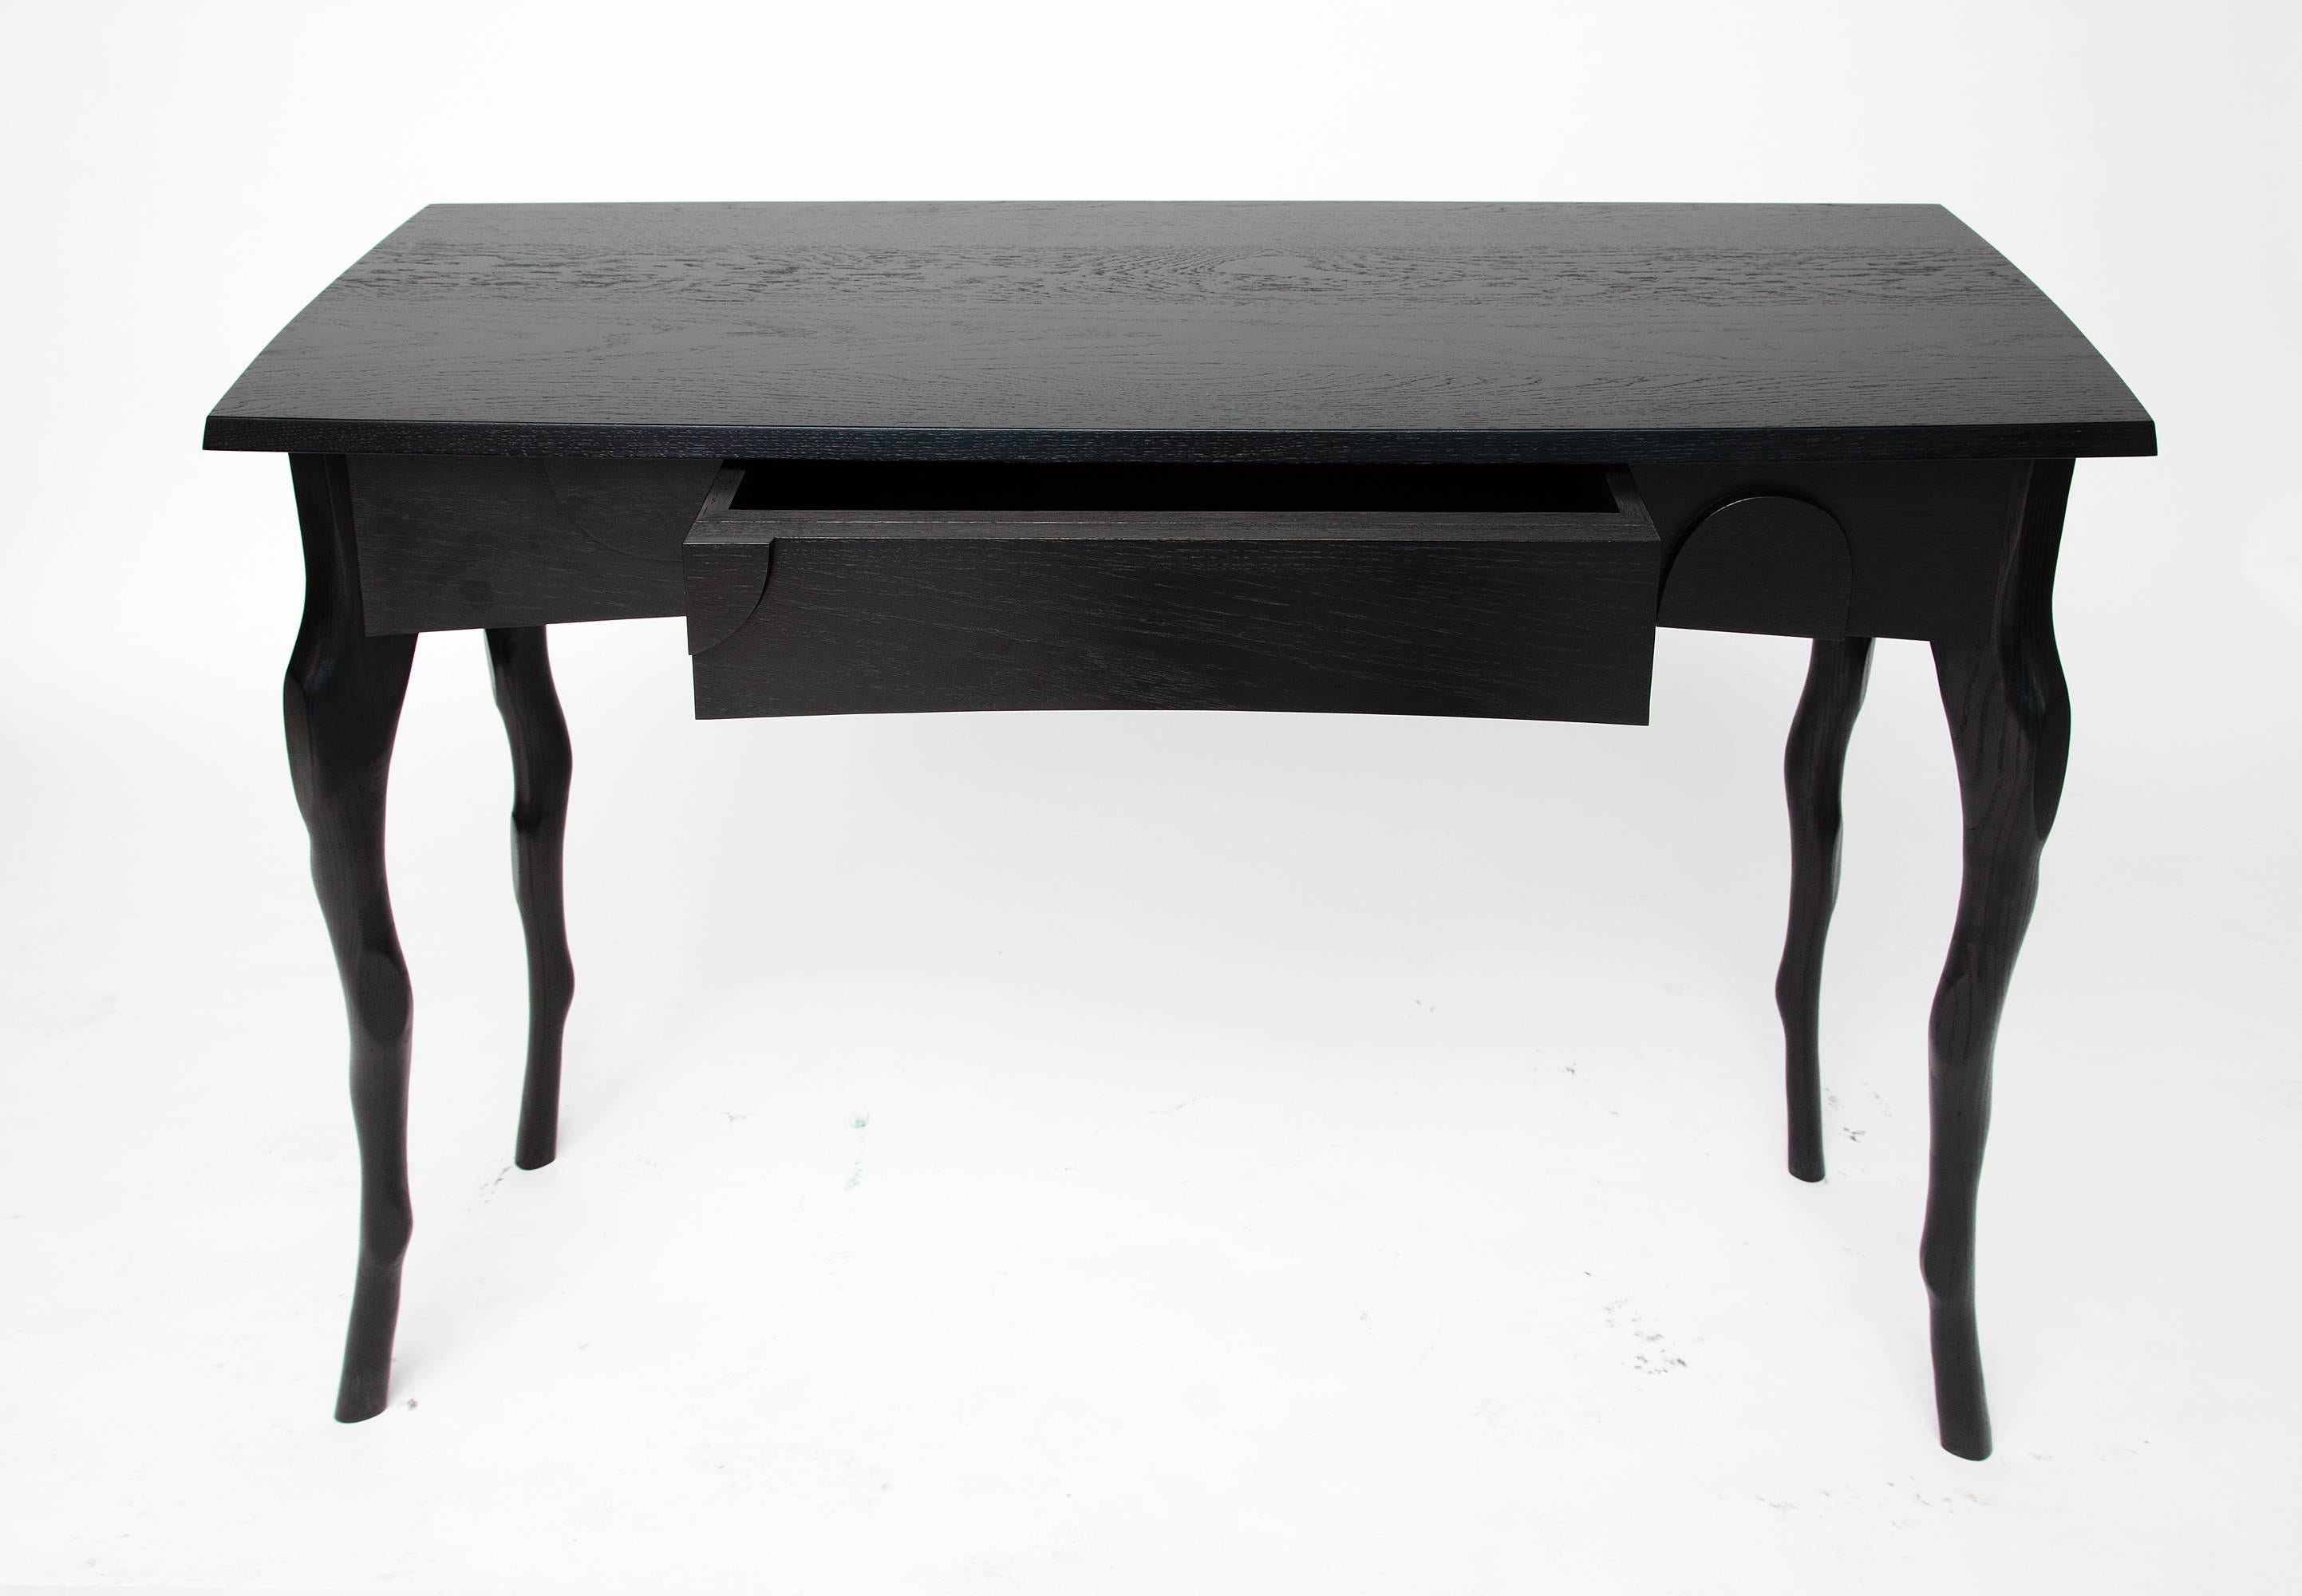 Jacques Jarrige has sculpted branch like legs to support an elegant top and slightly curved. The apron is adorned with his signature facets and has a central drawer. The oak is stained with the lush Napoleon III black stain leaving the veins of the